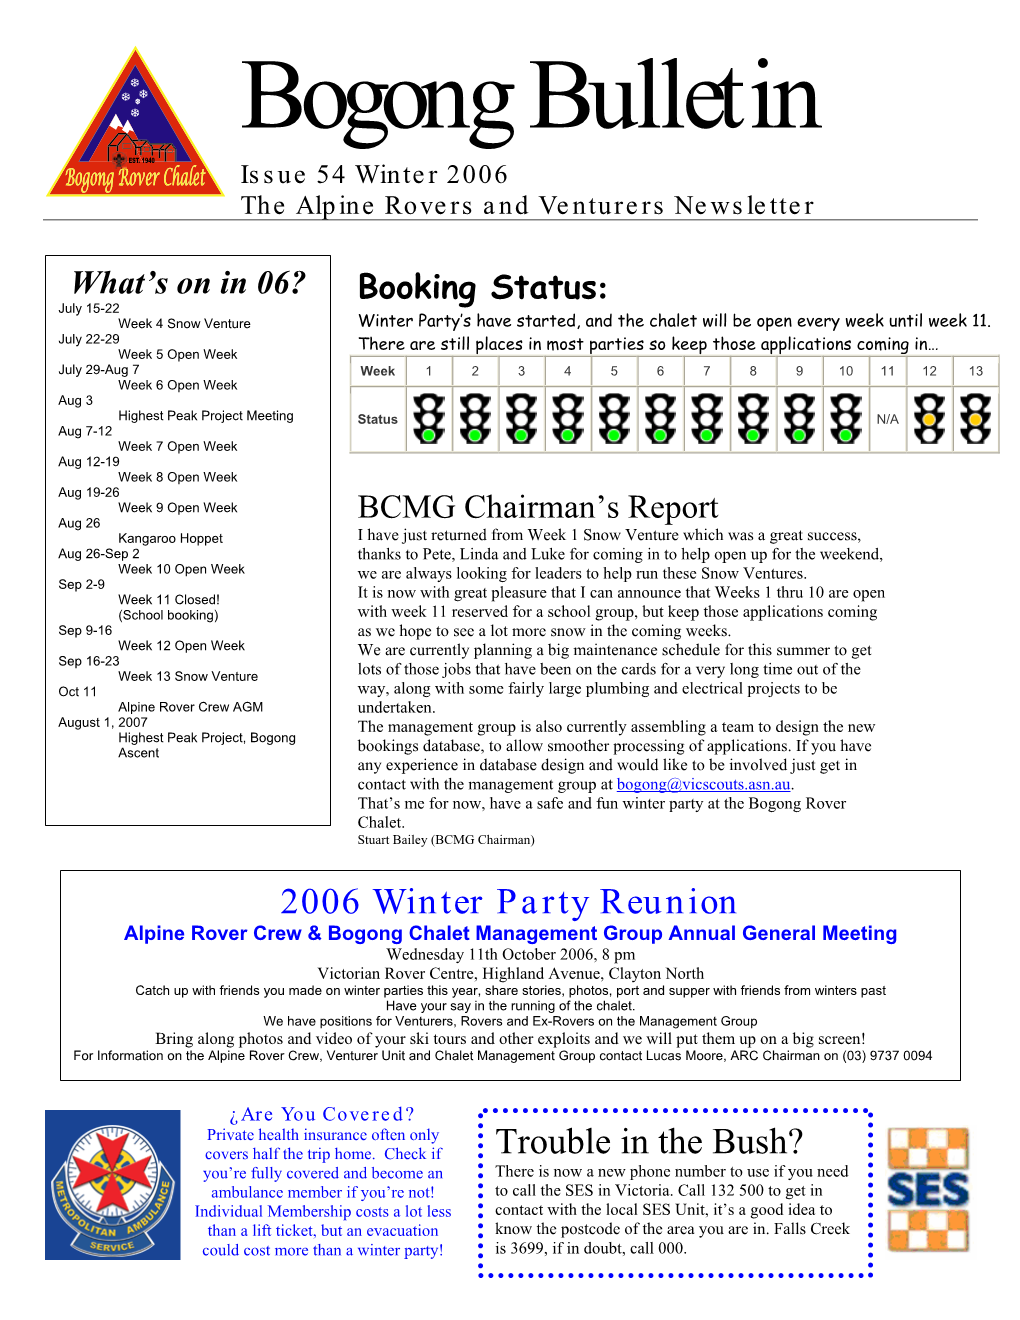 Bogong Bulletin Issue 54 Winter 2006 the Alpine Rovers and Venturers Newsletter